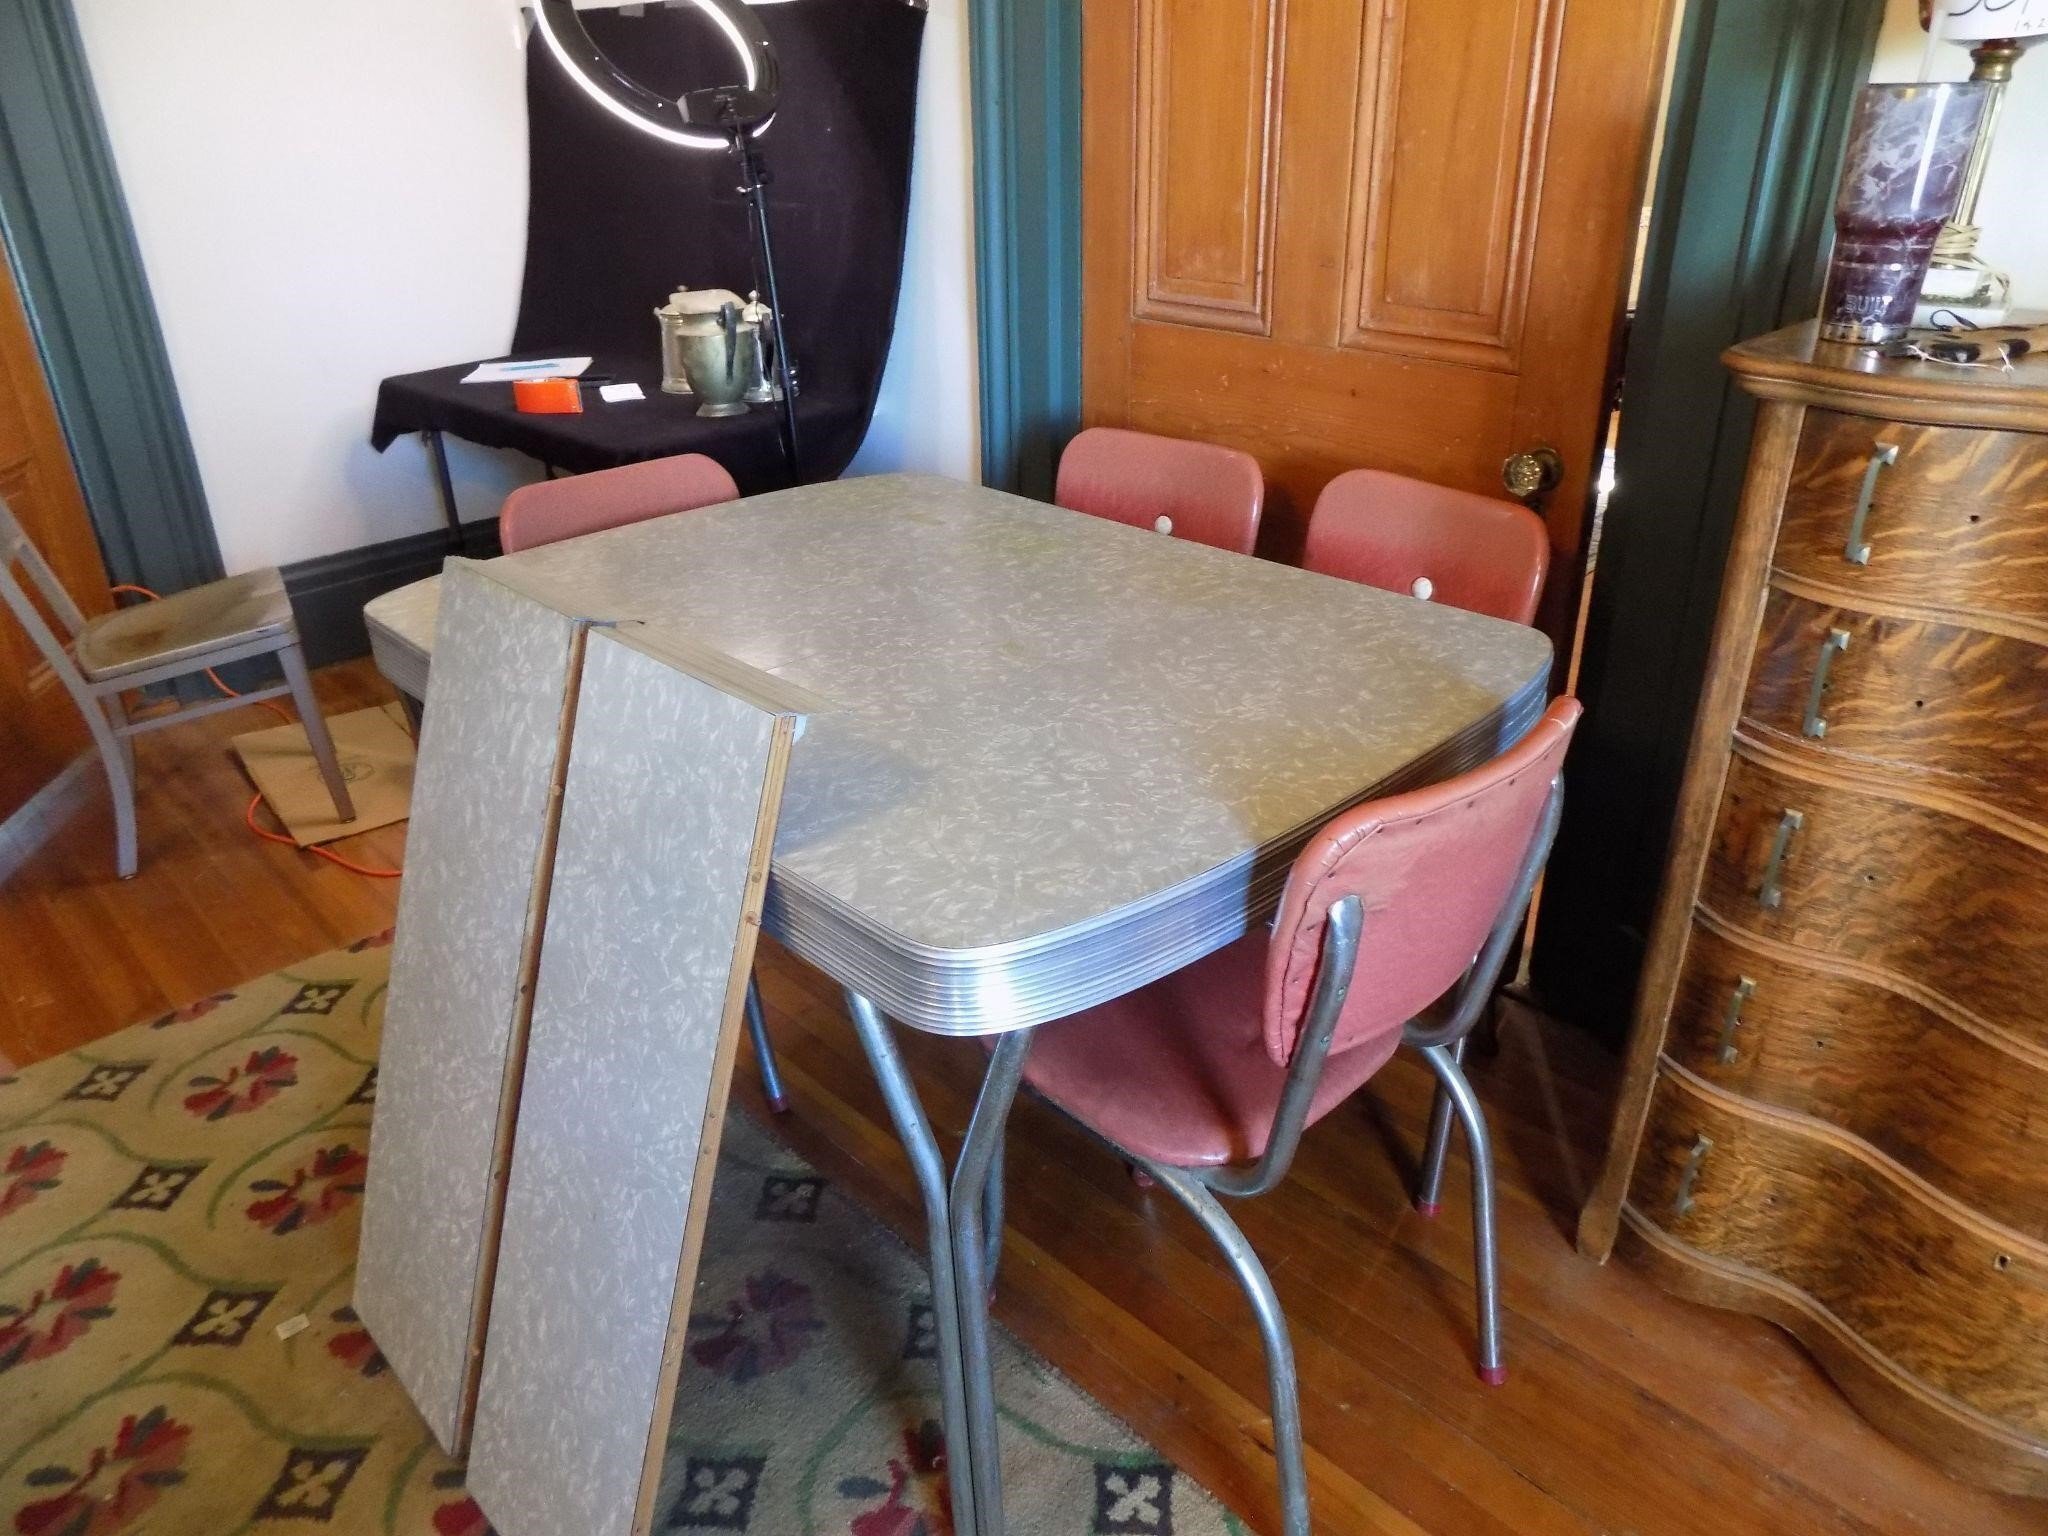 FORMICA TABLE & CHAIRS